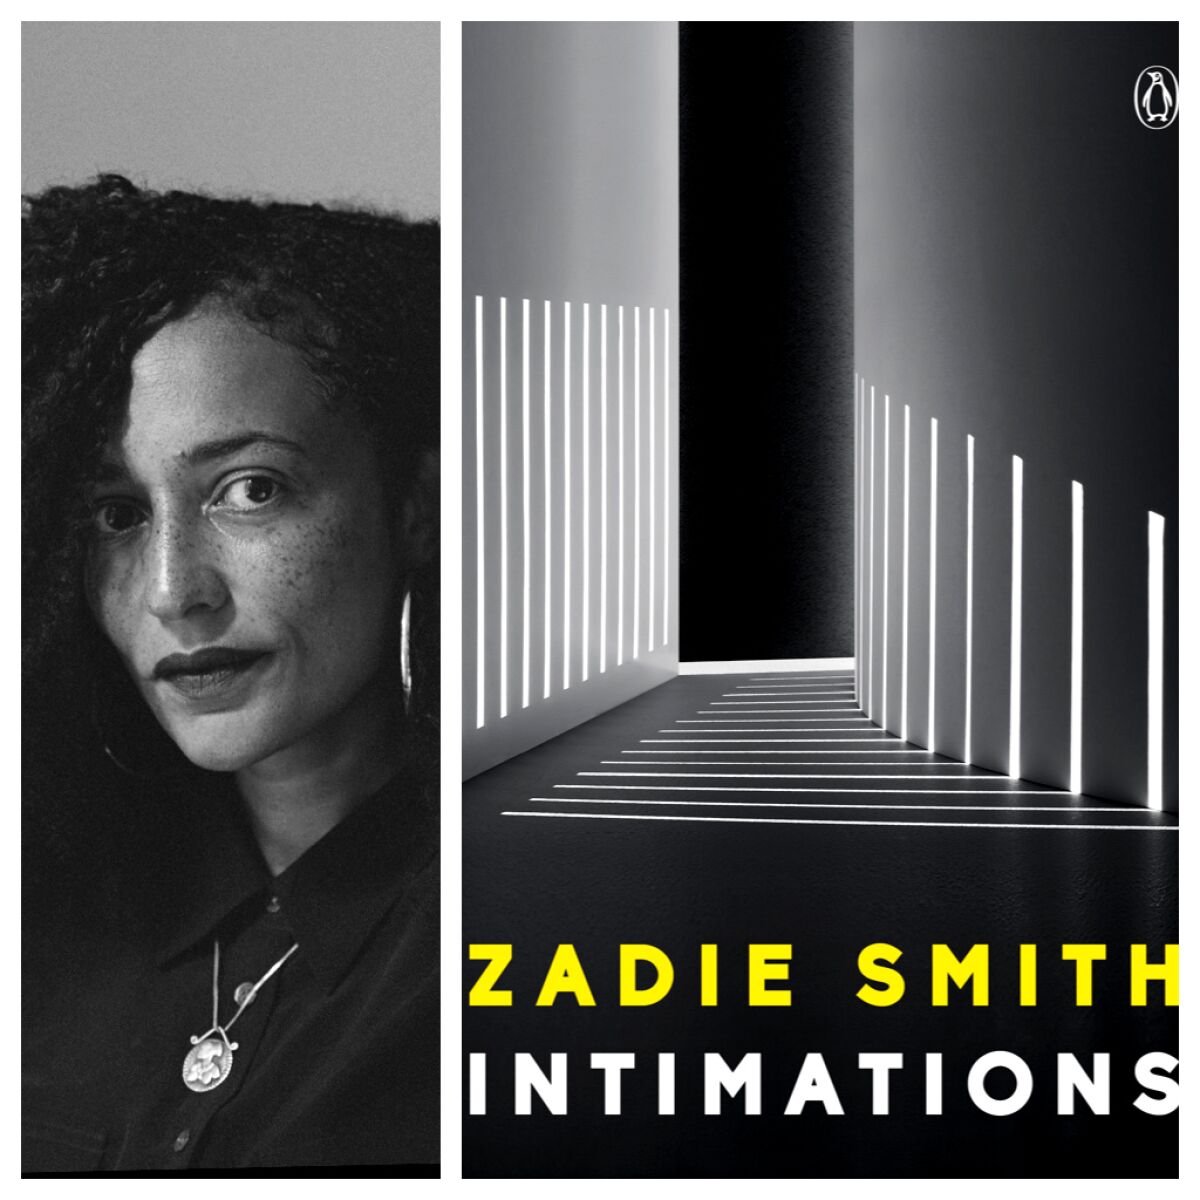 Zadie Smith, author of the collection of essays “Intimations.”